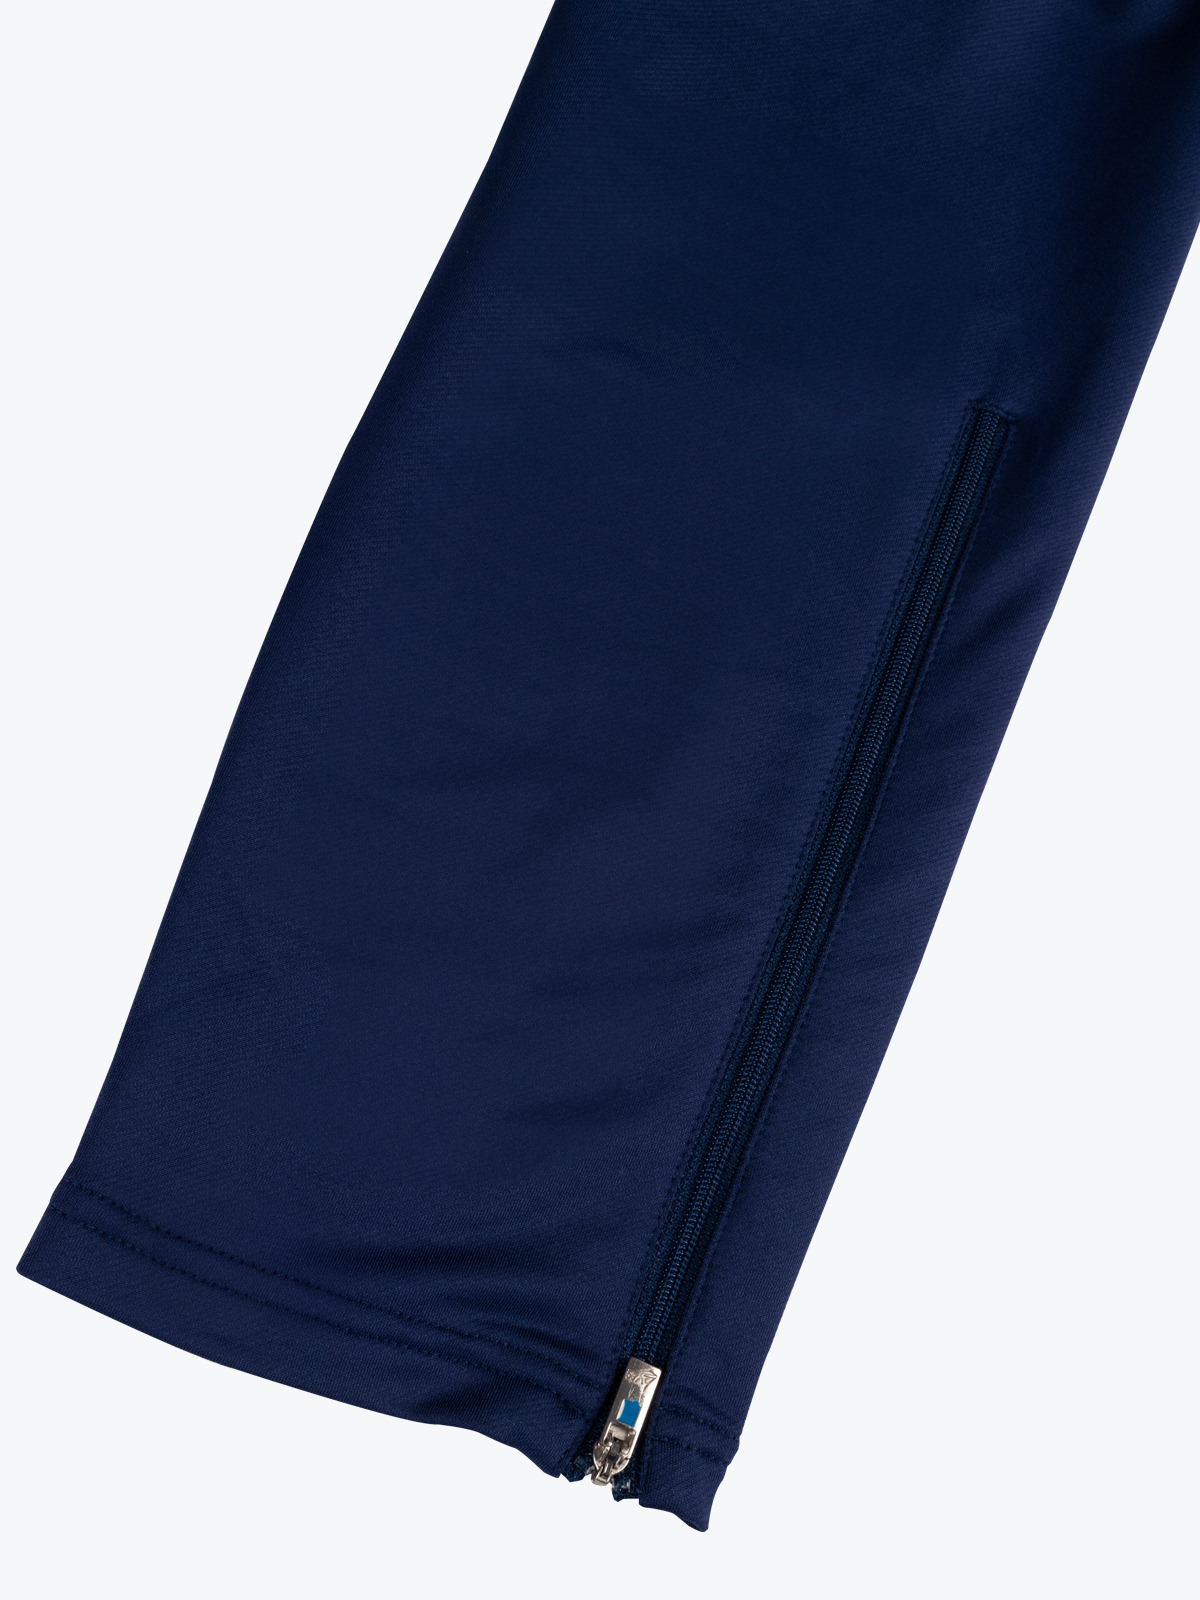 picture of focus 2 tech pant - navy